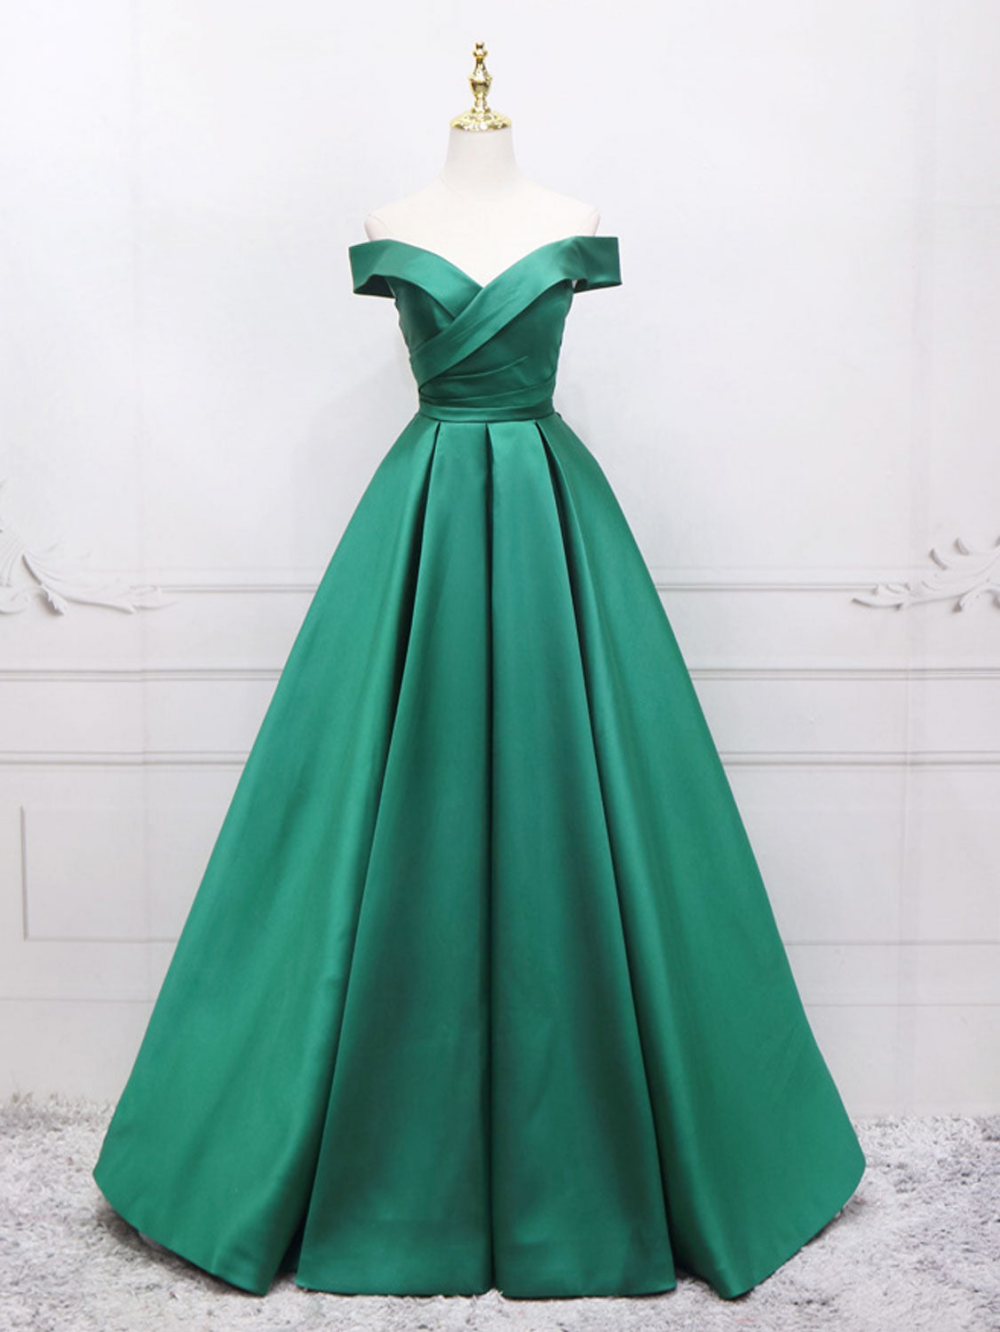 Green One Line Collar Off Shoulder Floor Party Dress Homecoming Dress Party Ball Dress Can Be Customized In Colors And Sizes